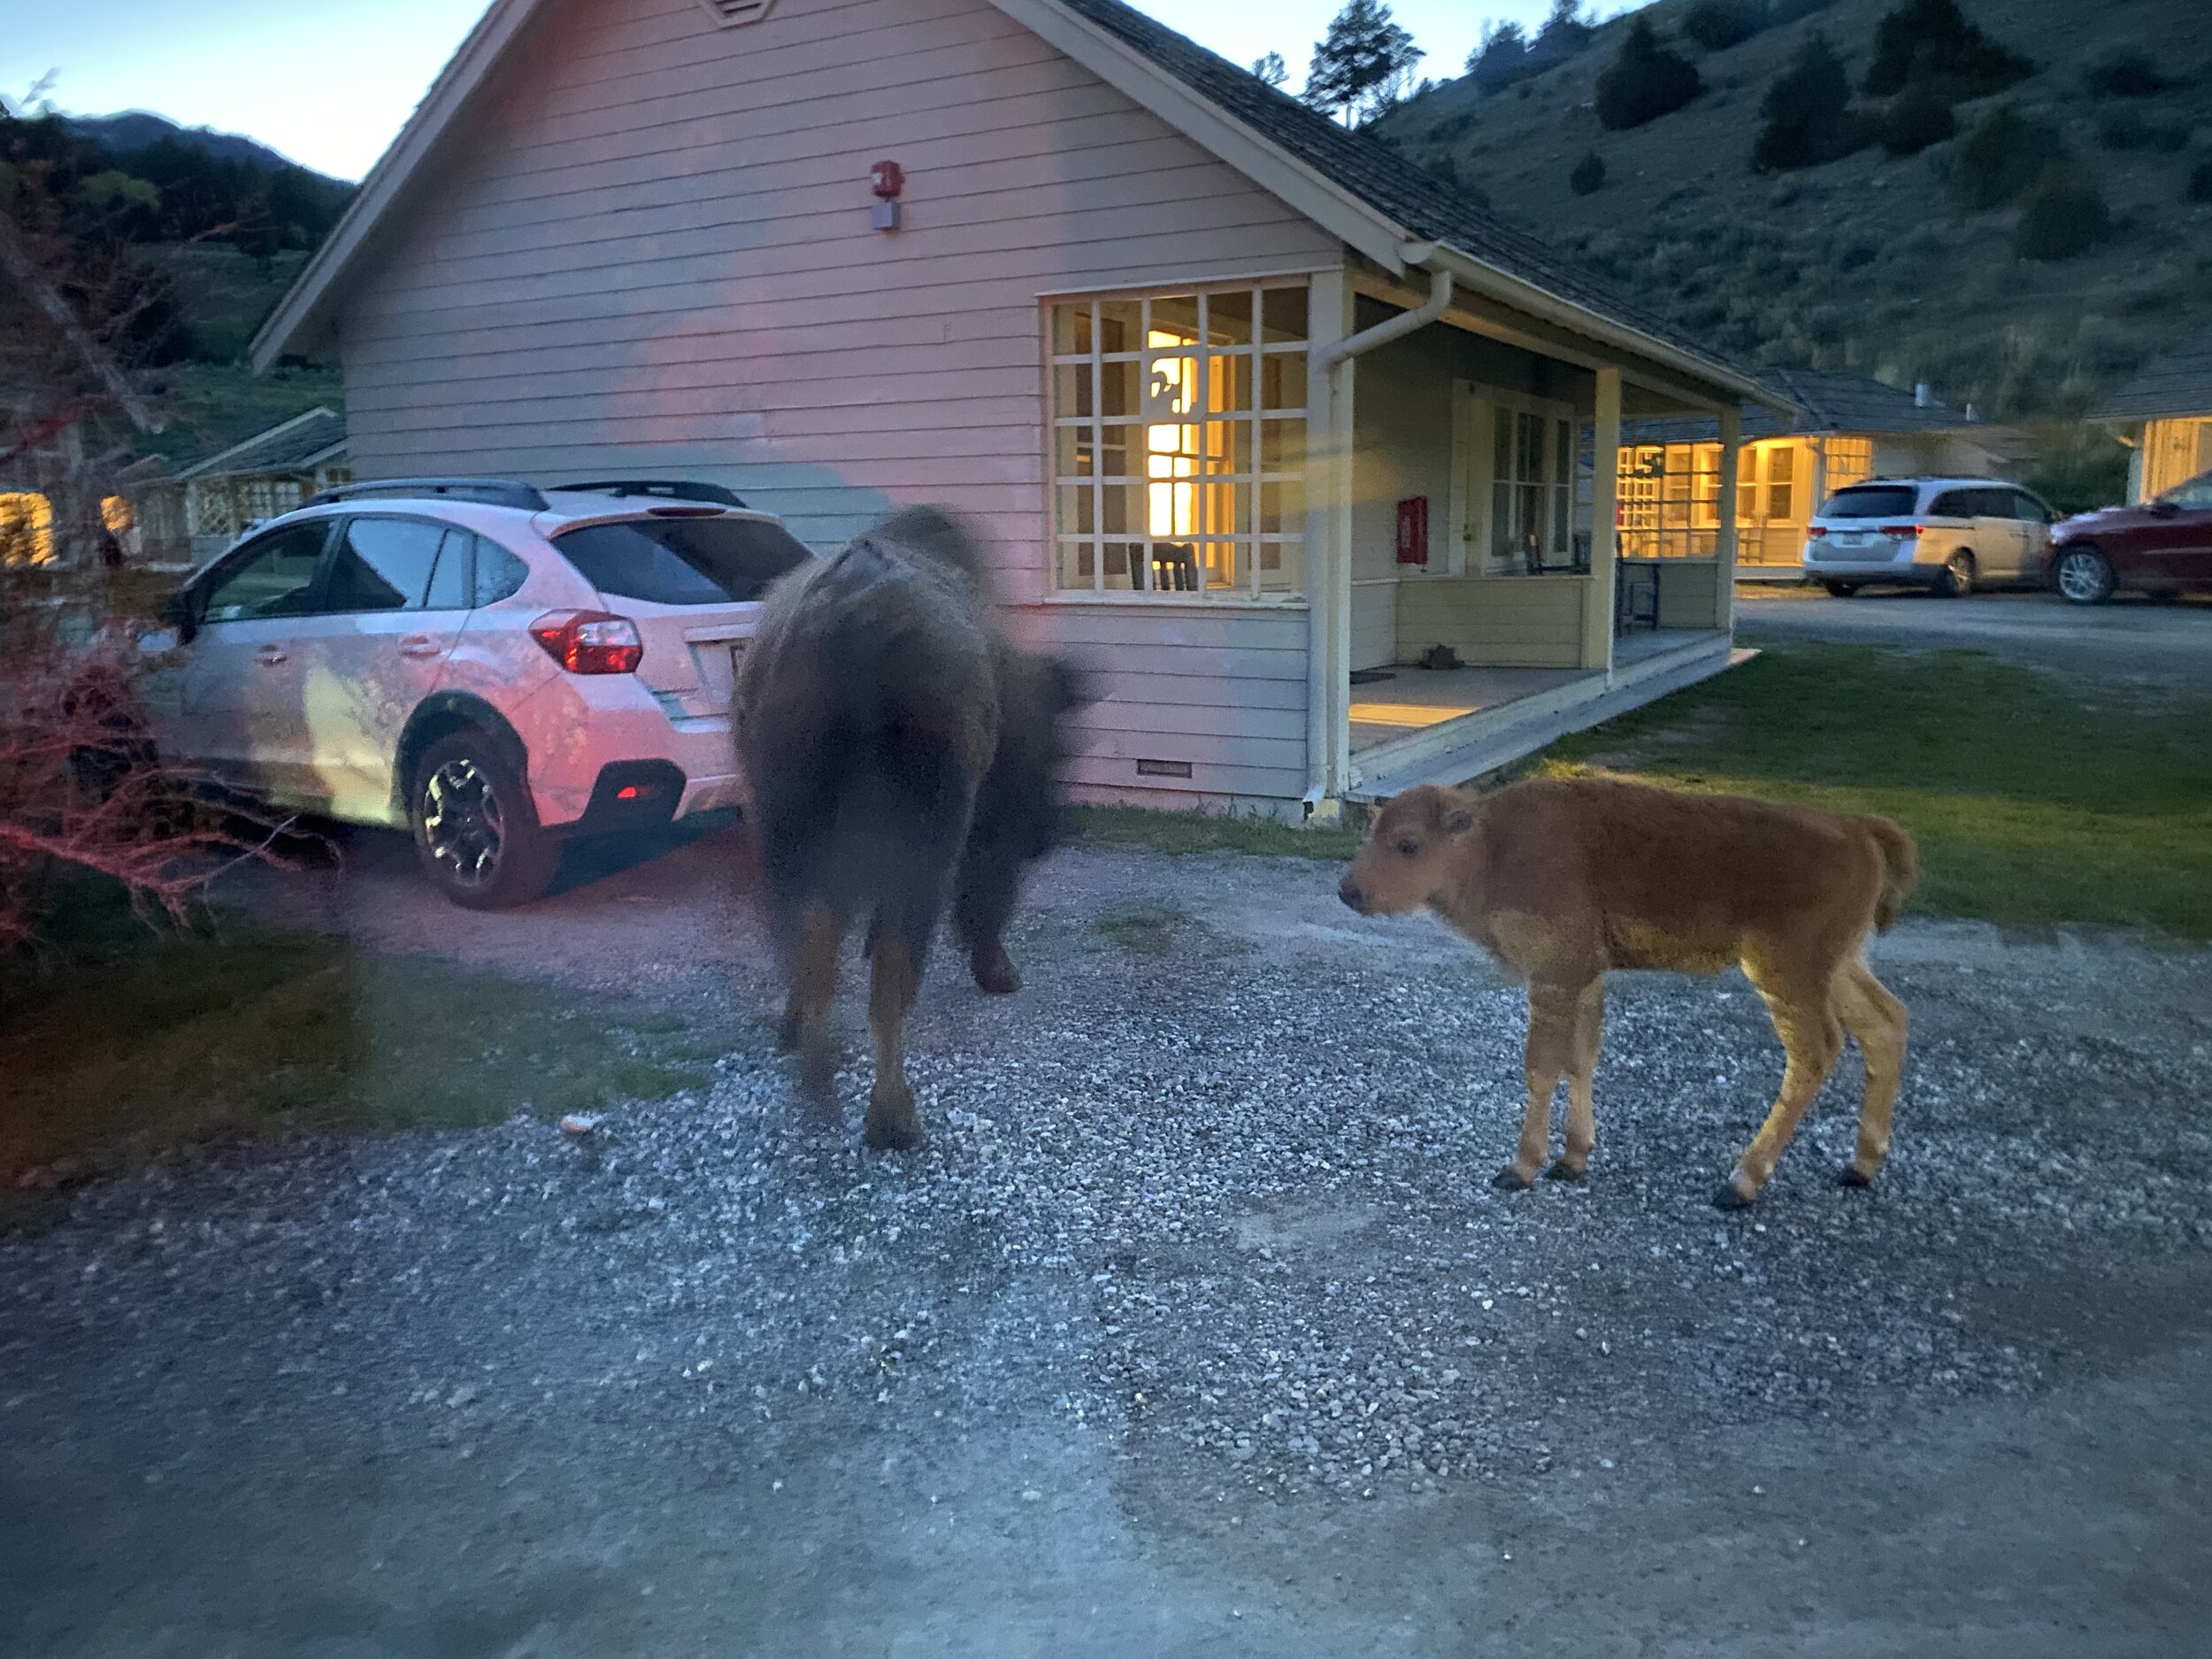 Bison walking through cabins area at Mammoth.  Photo by Karen Boudreaux, May 29, 2021